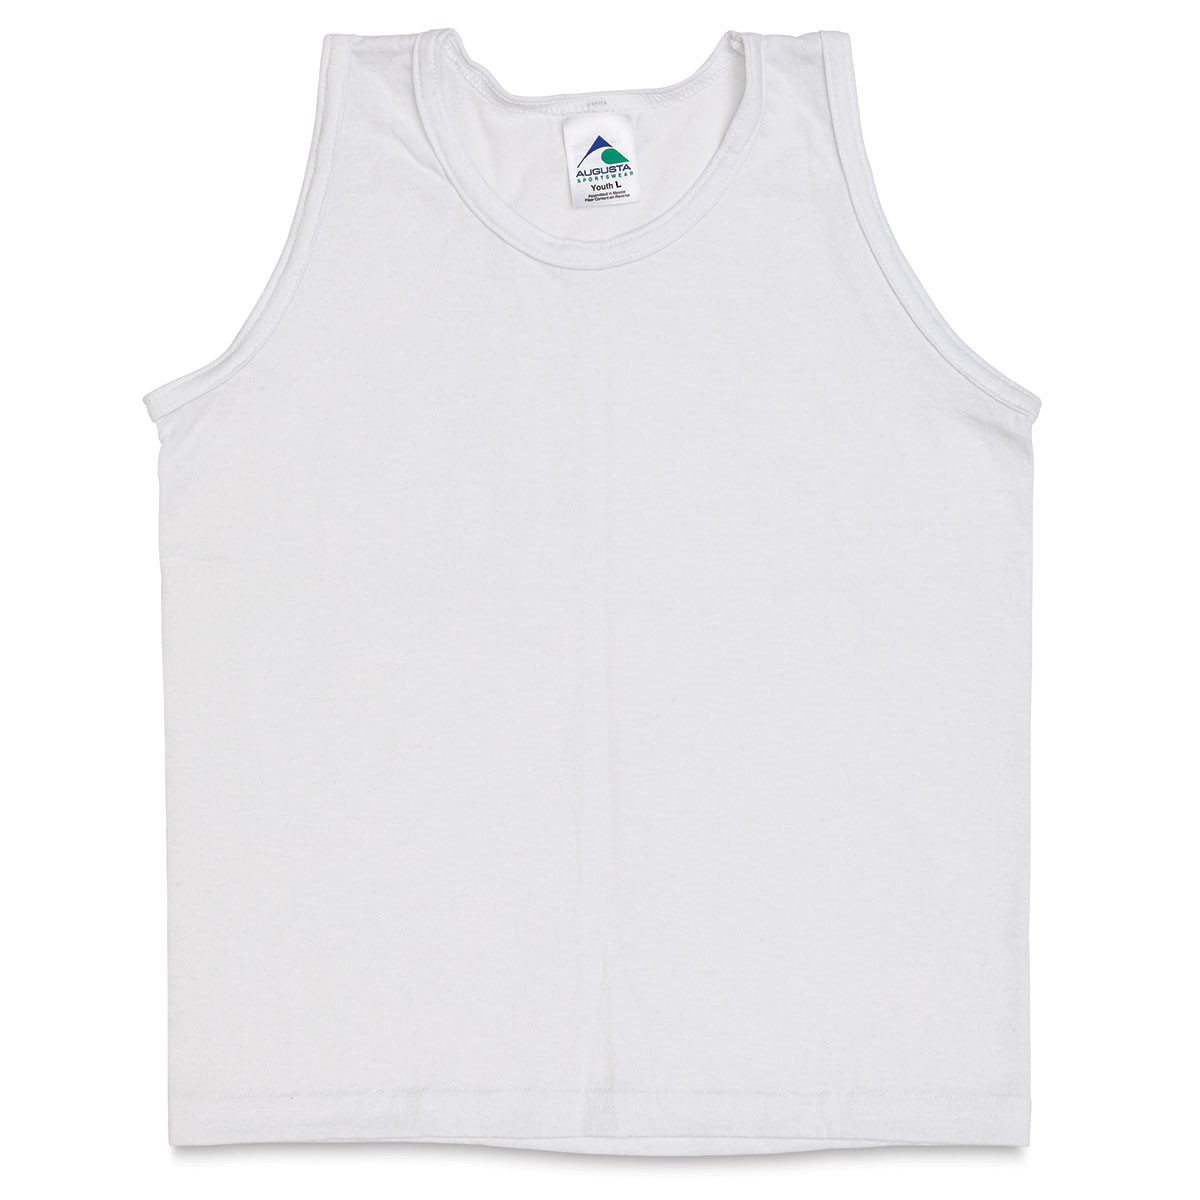 Youth Tank Top - White, Large | BLICK Art Materials